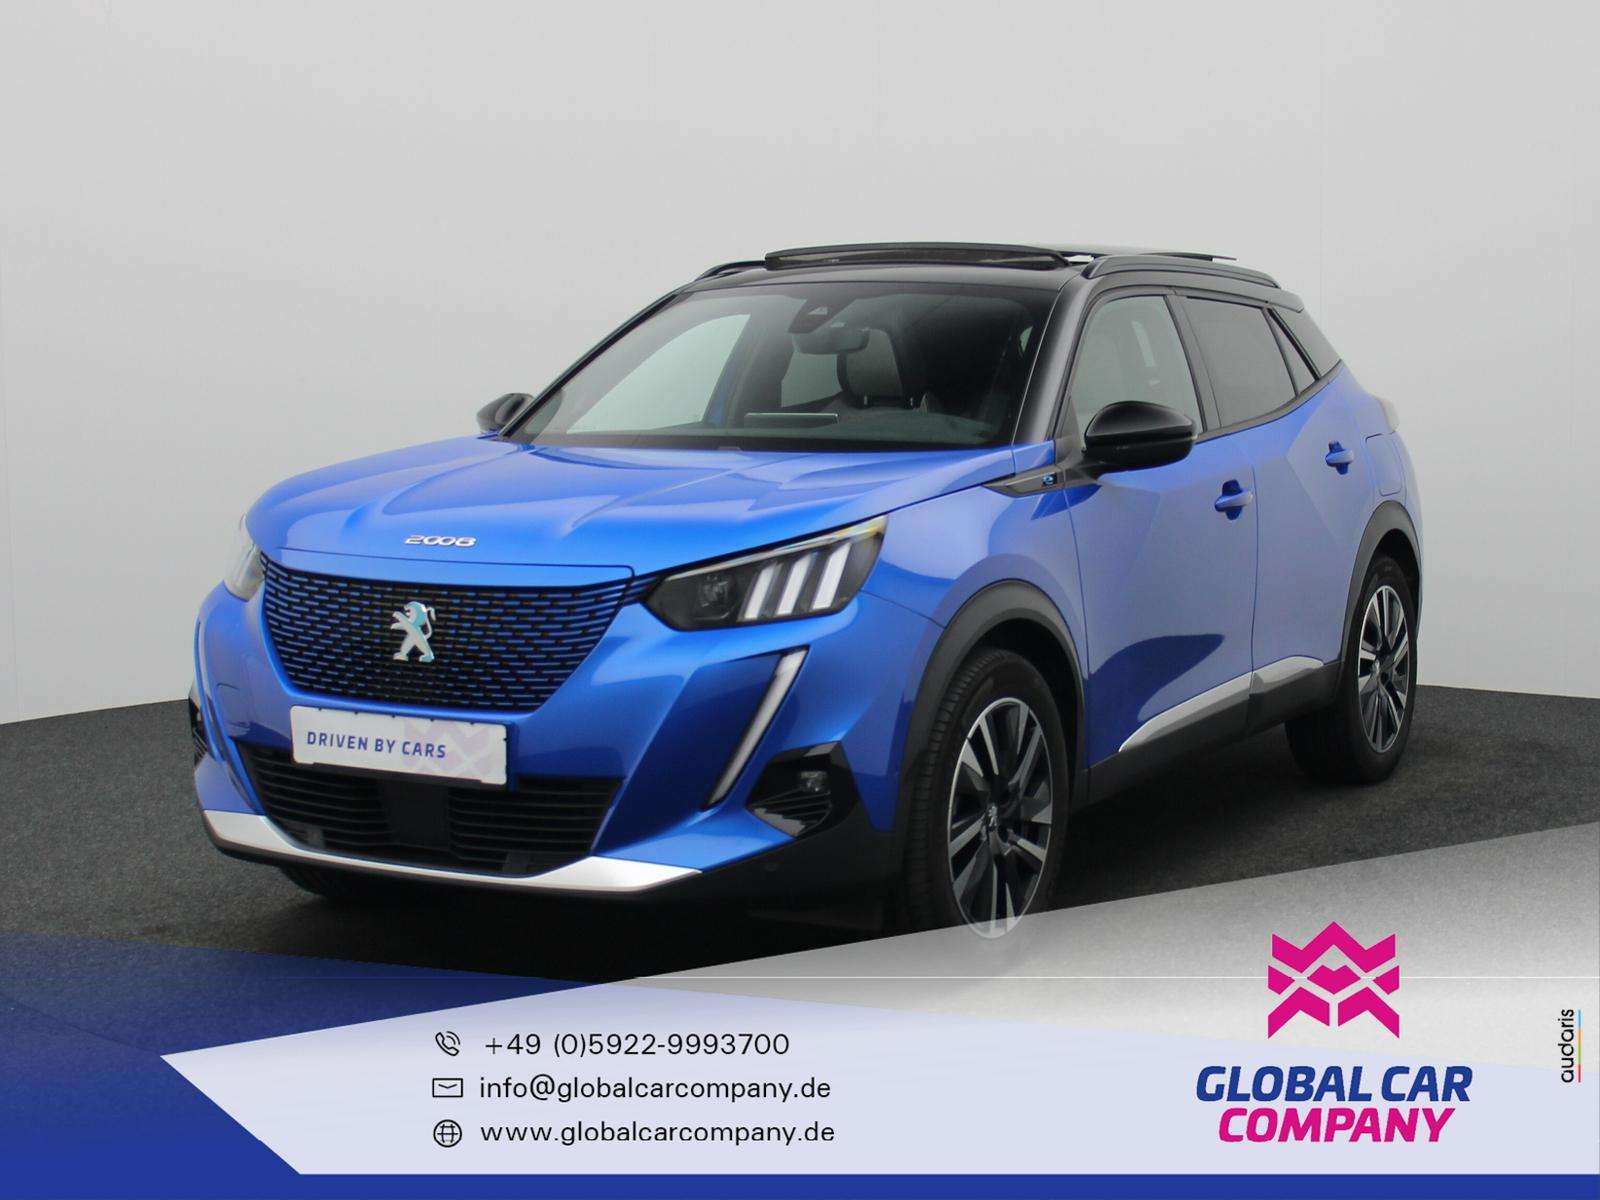 Peugeot 2008 Off-Road/Pick-up in Blue used in Bad Bentheim for € 29,650.-